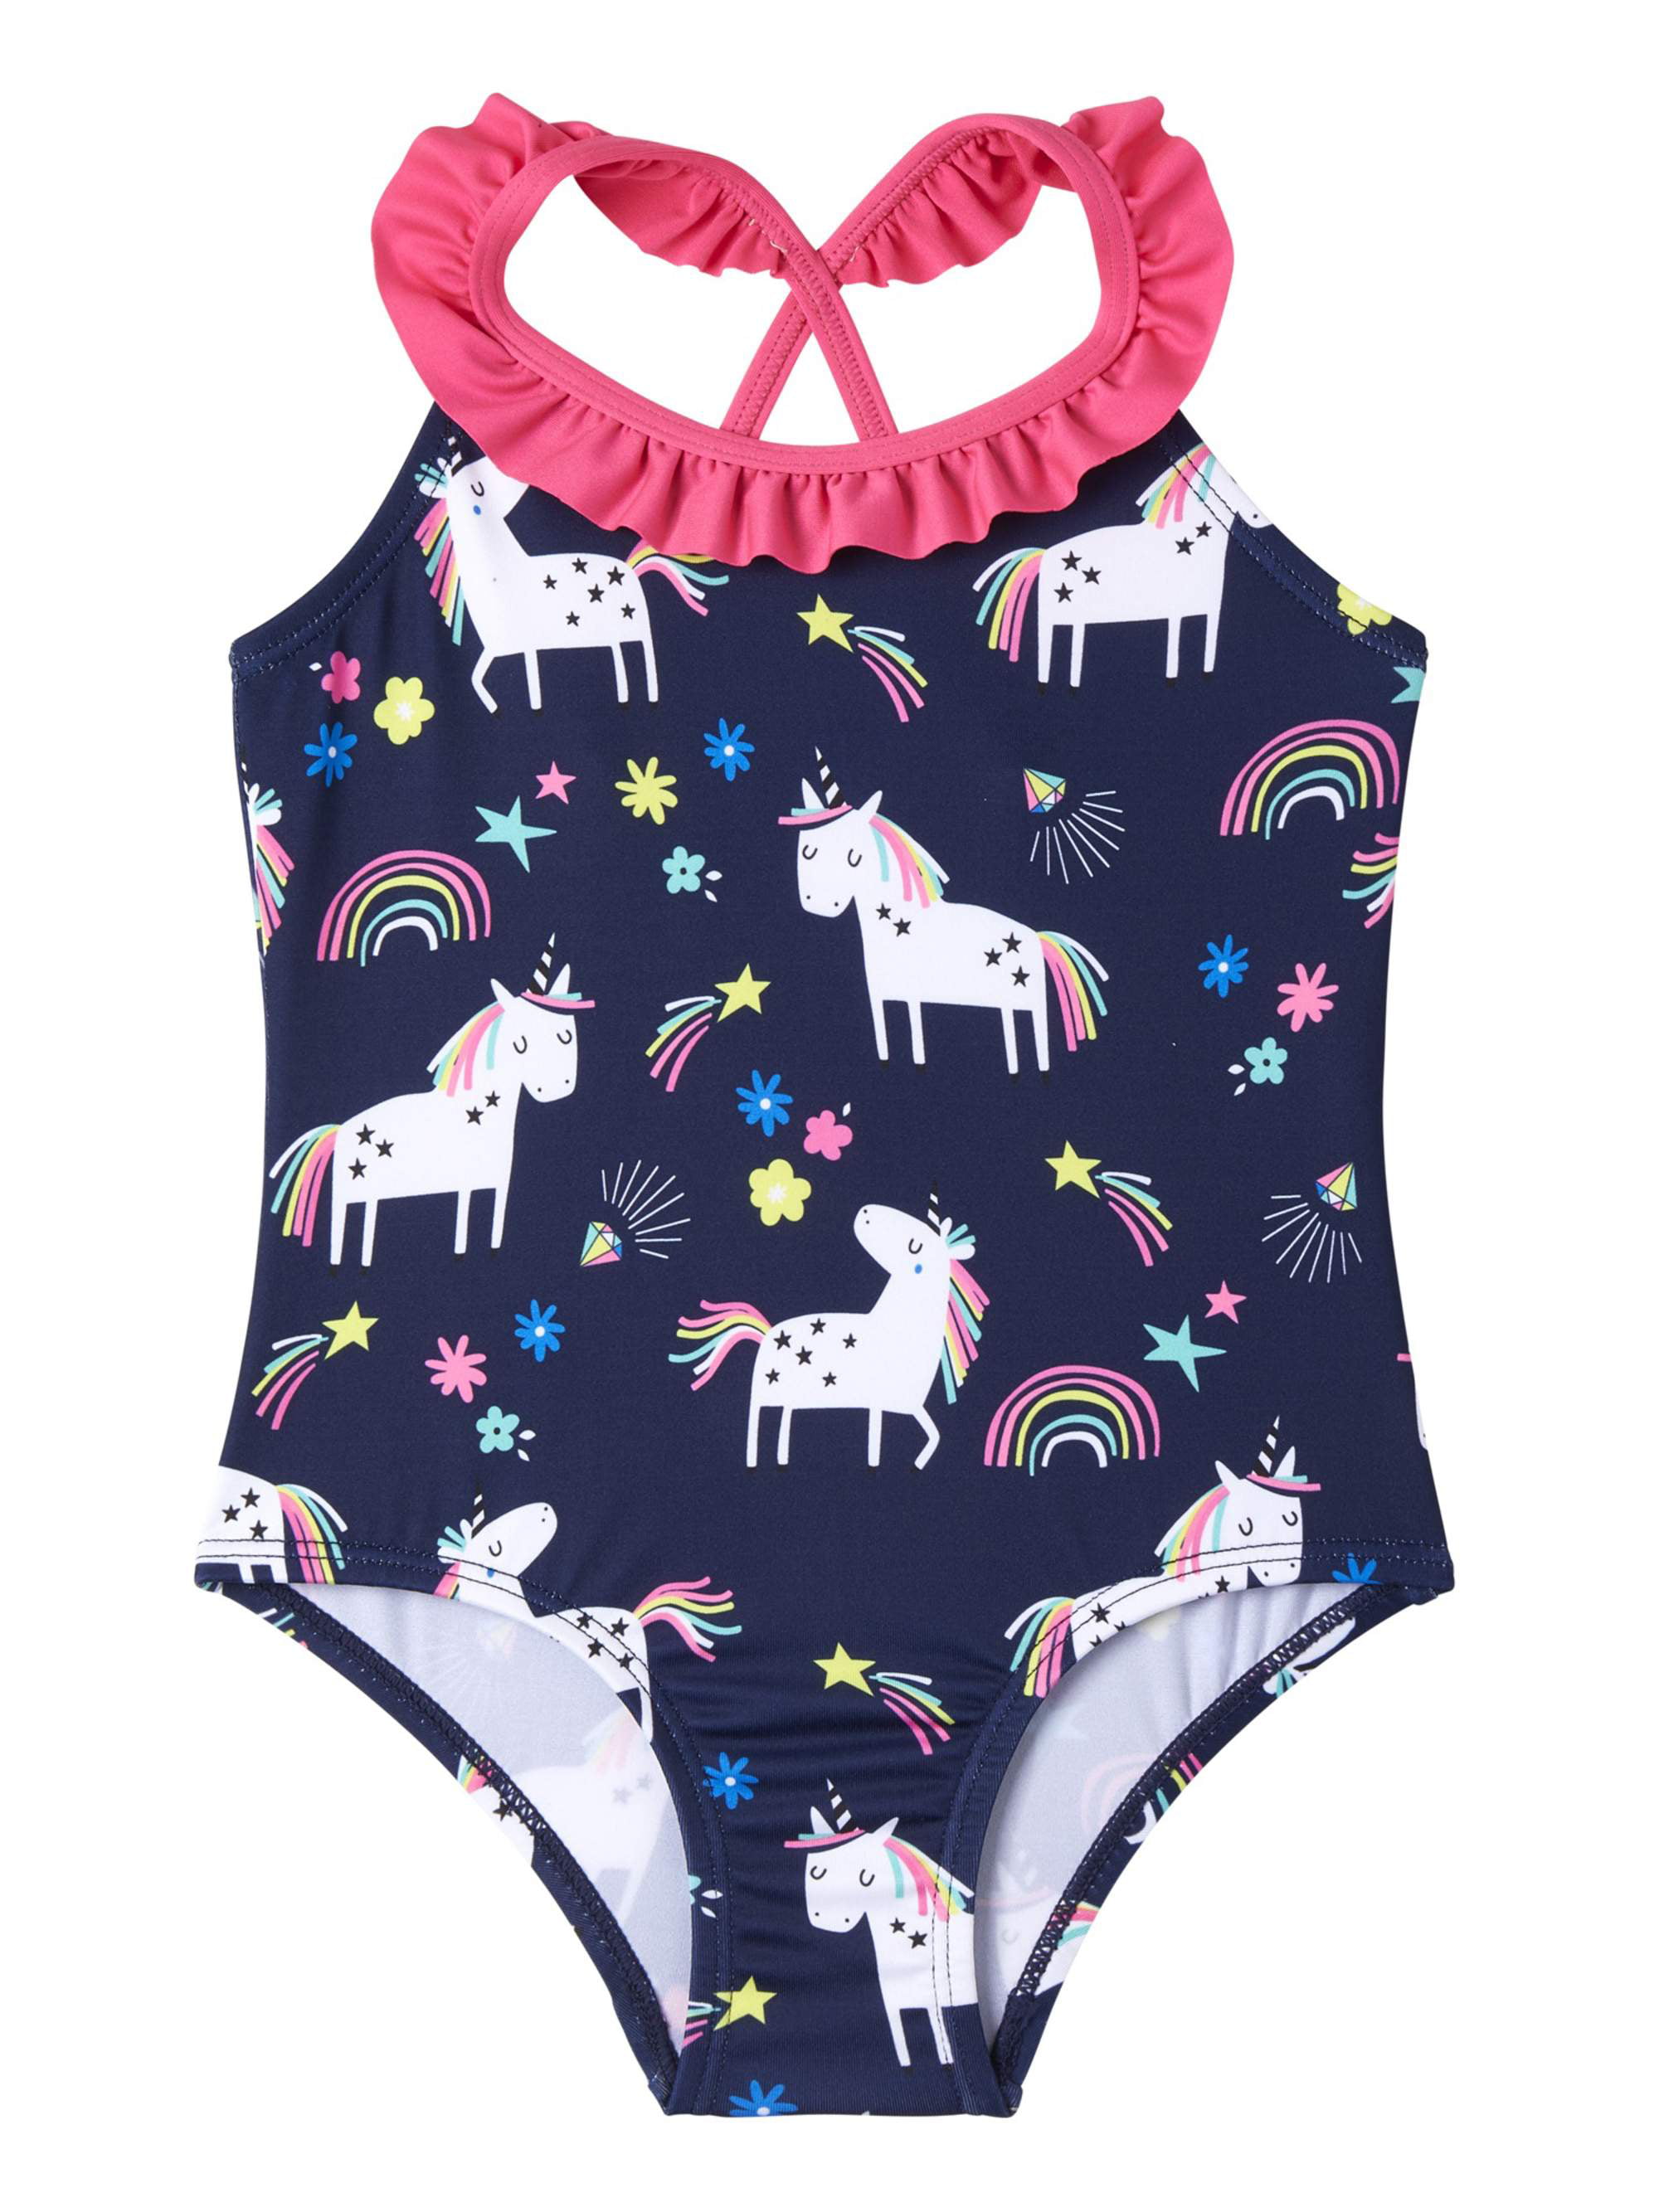 Wippette Baby Toddler Girl Unicorn One-Piece Swimsuit - Walmart.com